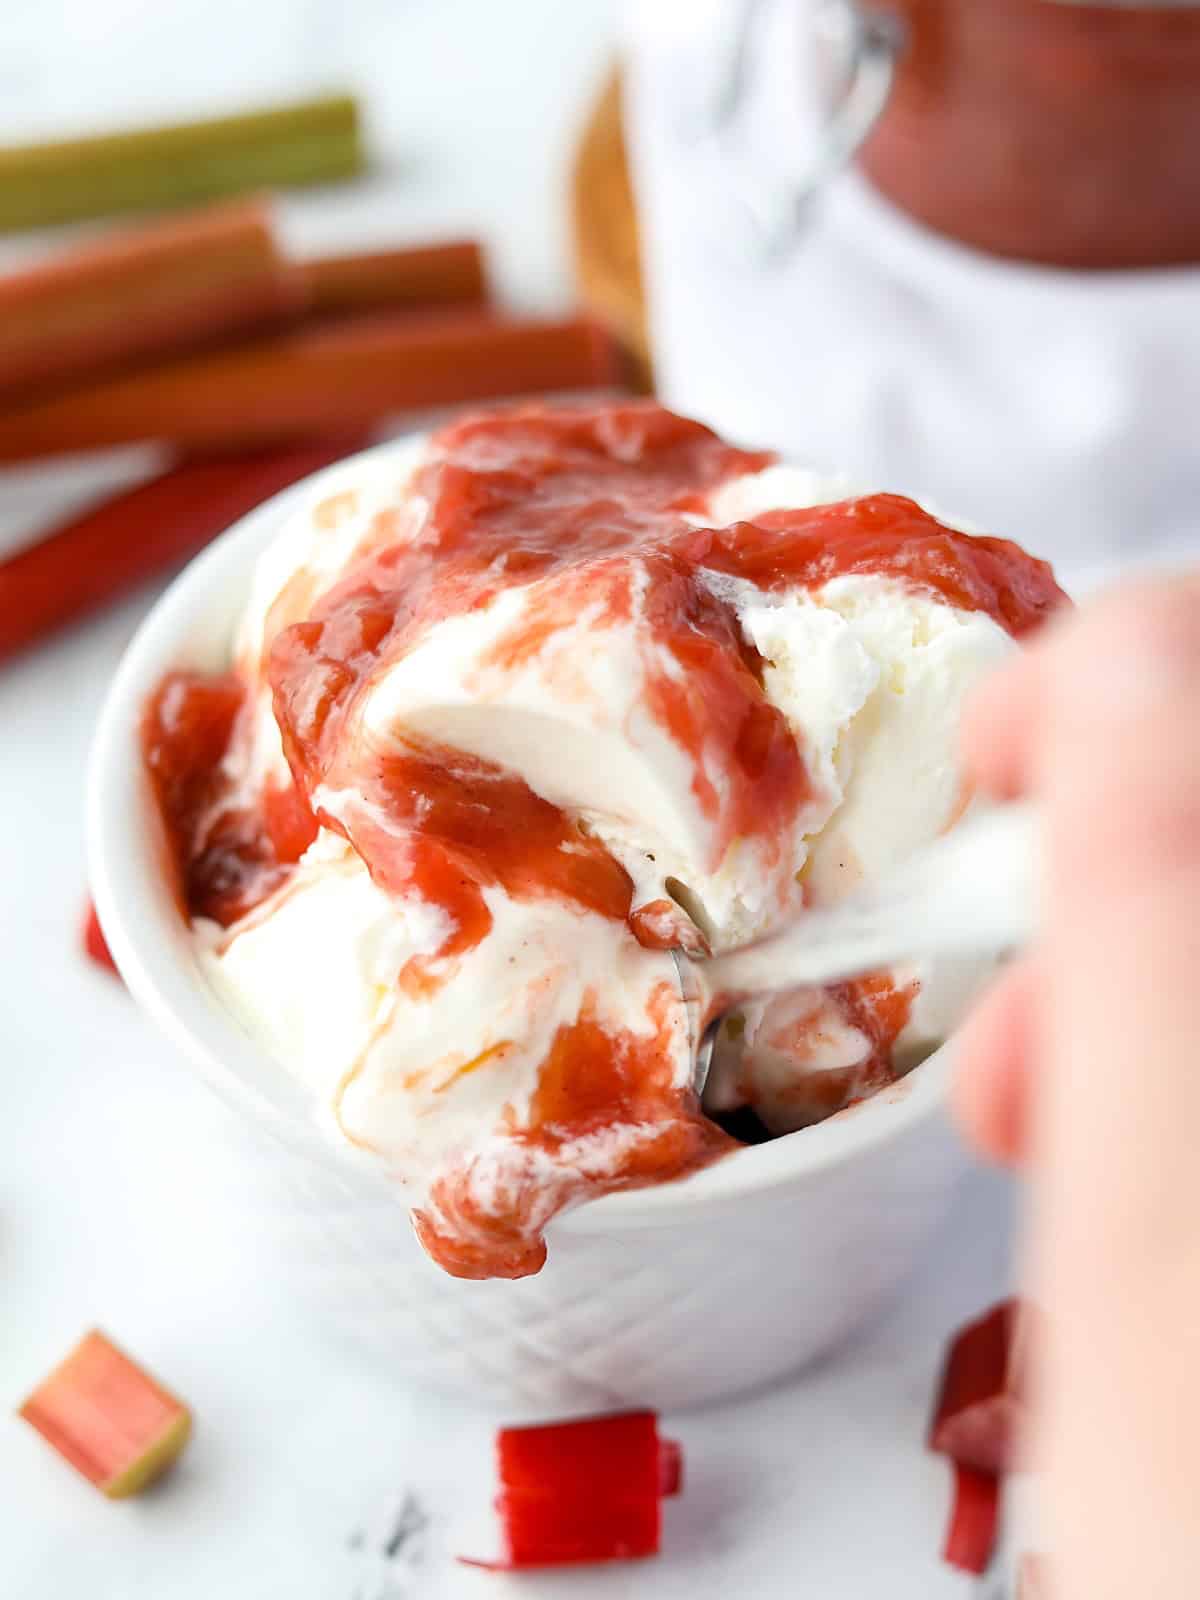 An icecream topped with rhubarb sauce.